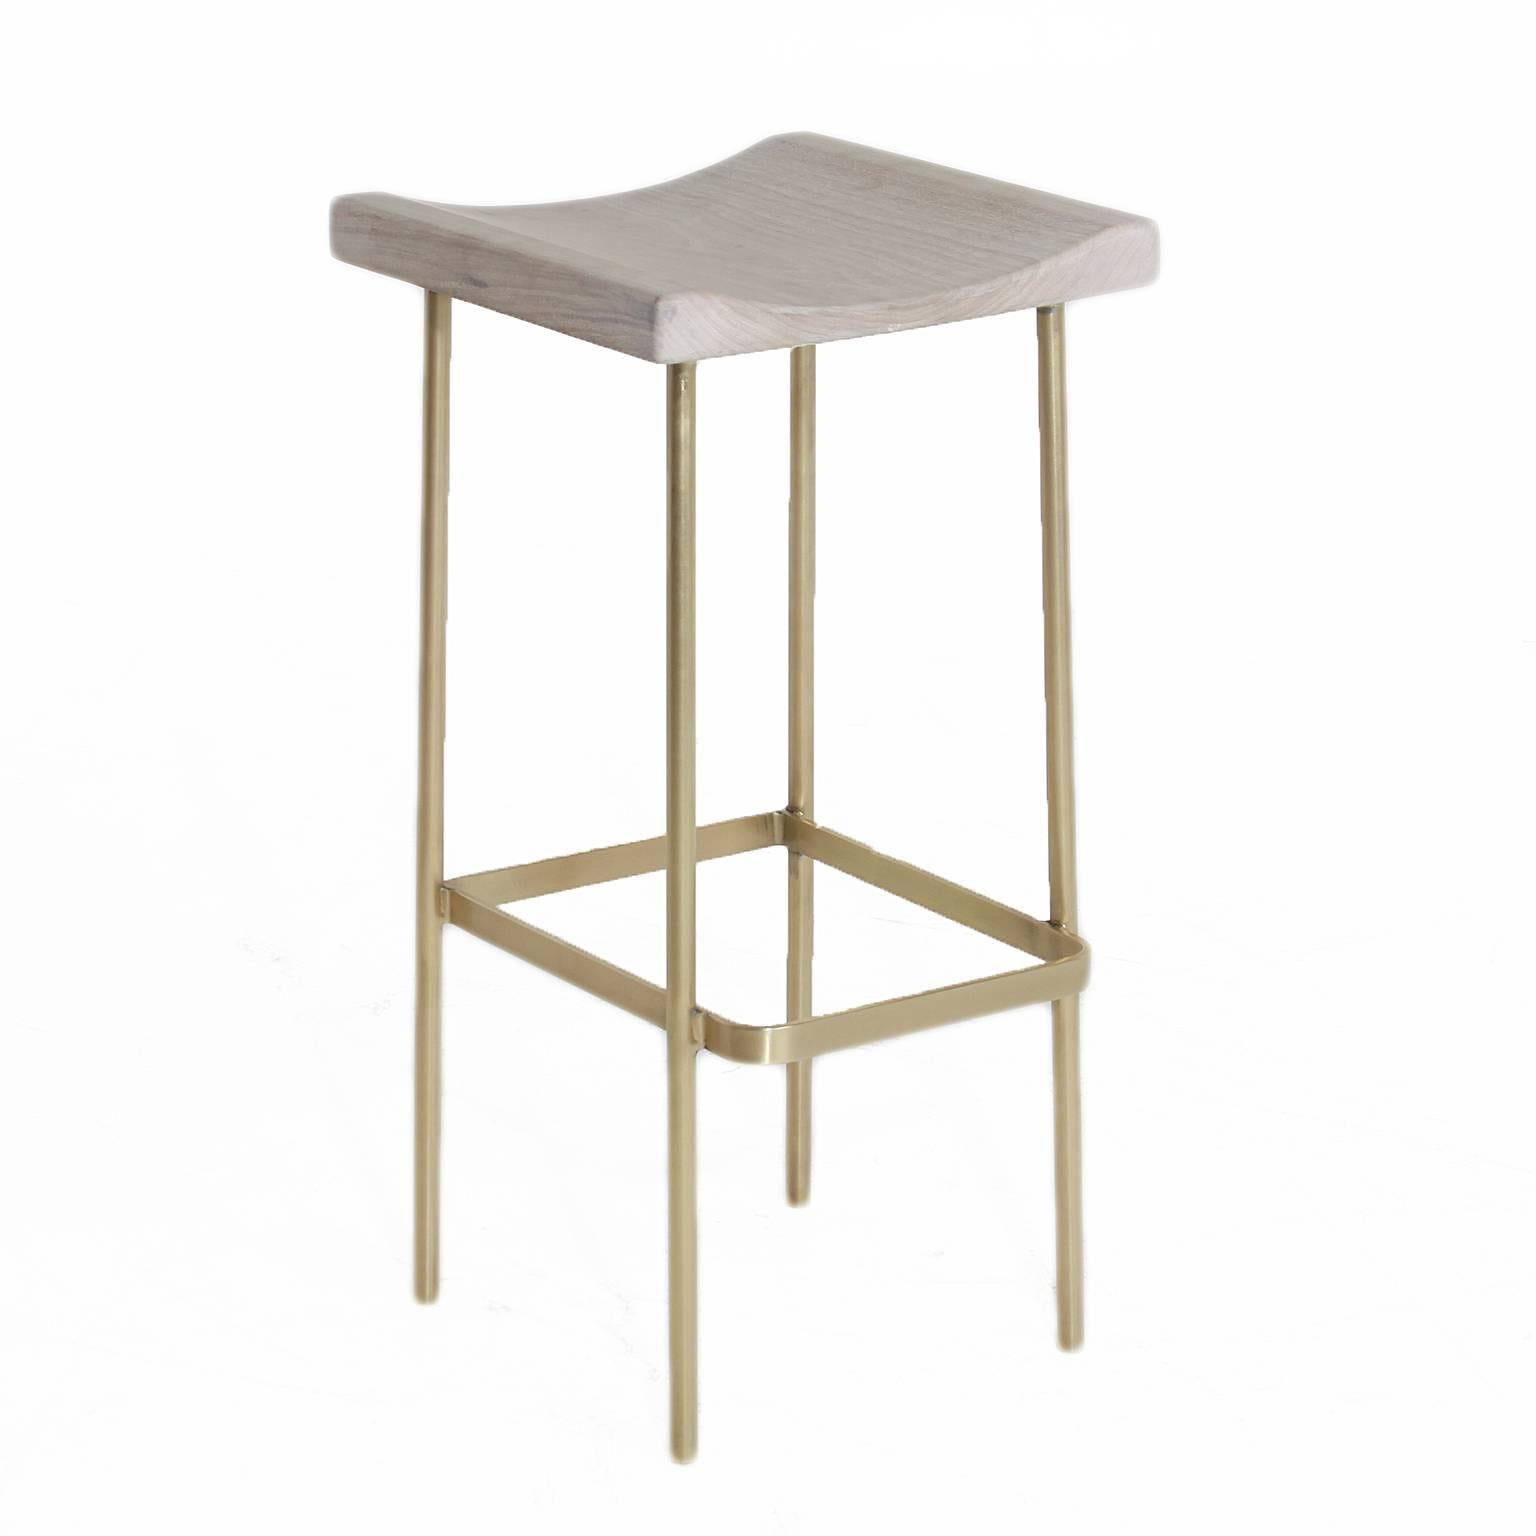 Mid-20th Century Bundinha Stool with Brass Base by Thomas Hayes Studio For Sale